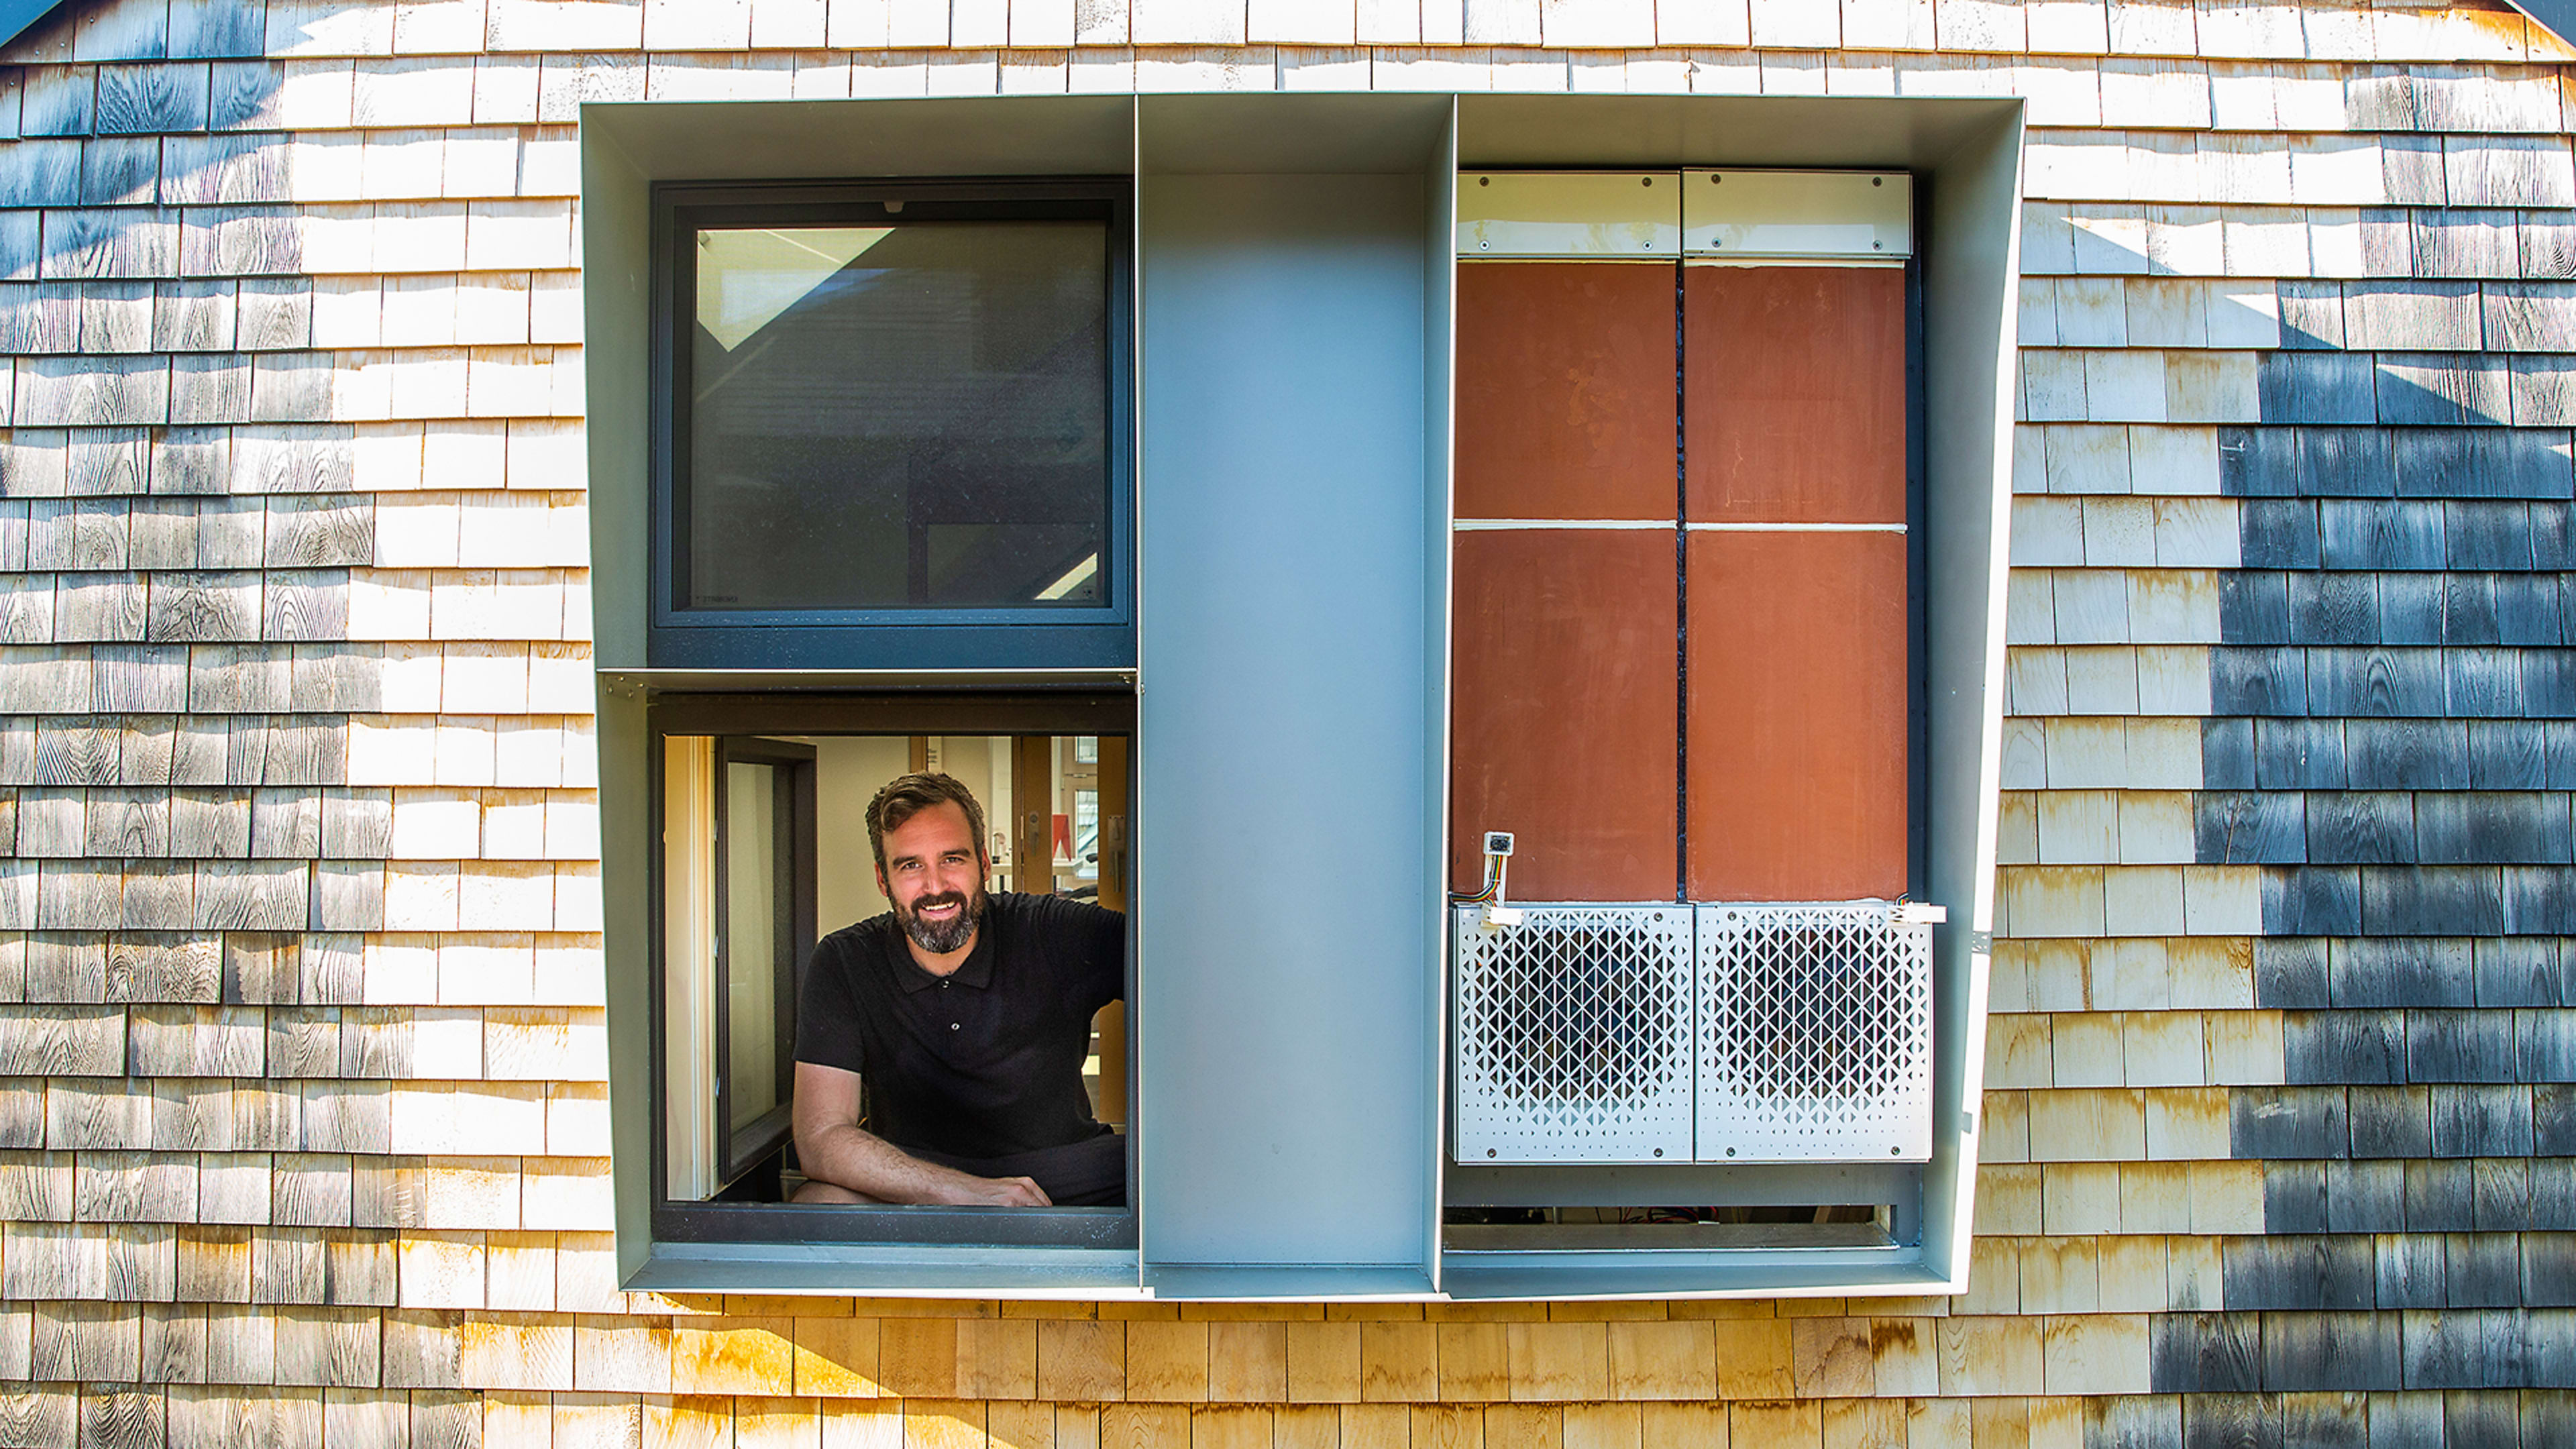 Harvard researchers designed a cheaper, more efficient air conditioner